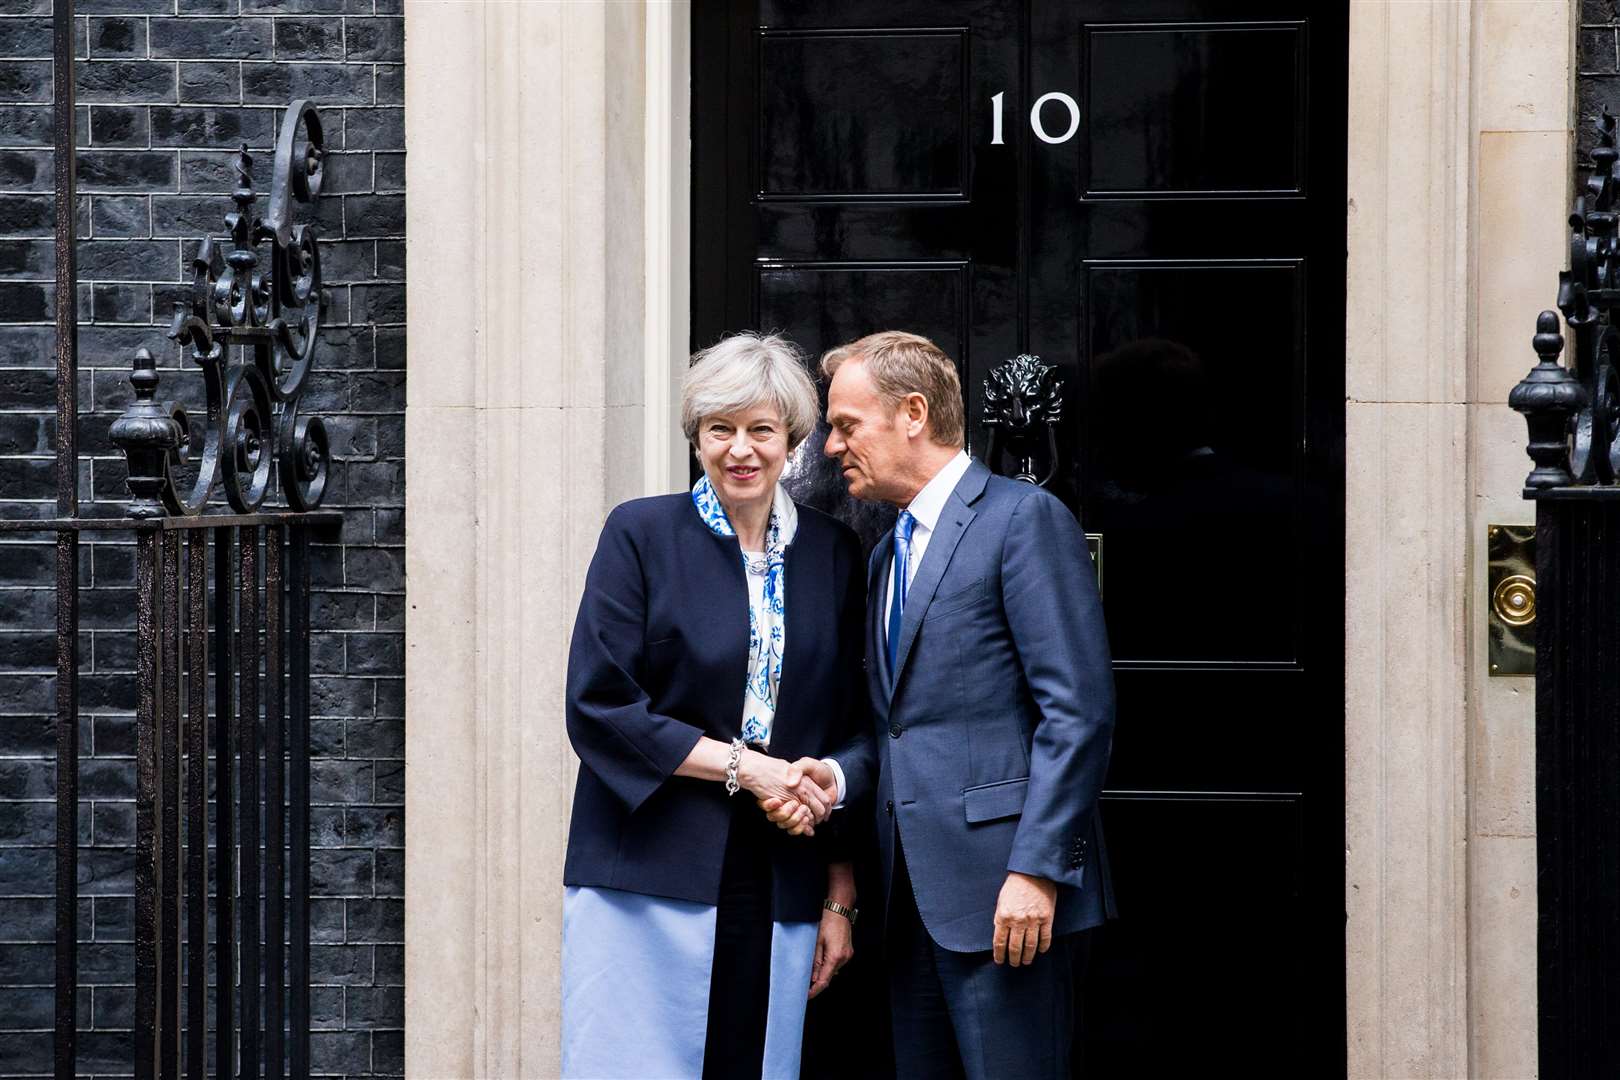 Prime Minister Theresa May meets Donald Tusk, President of the European Council, at Downing Street. Picture: SWNS / Adam Gray